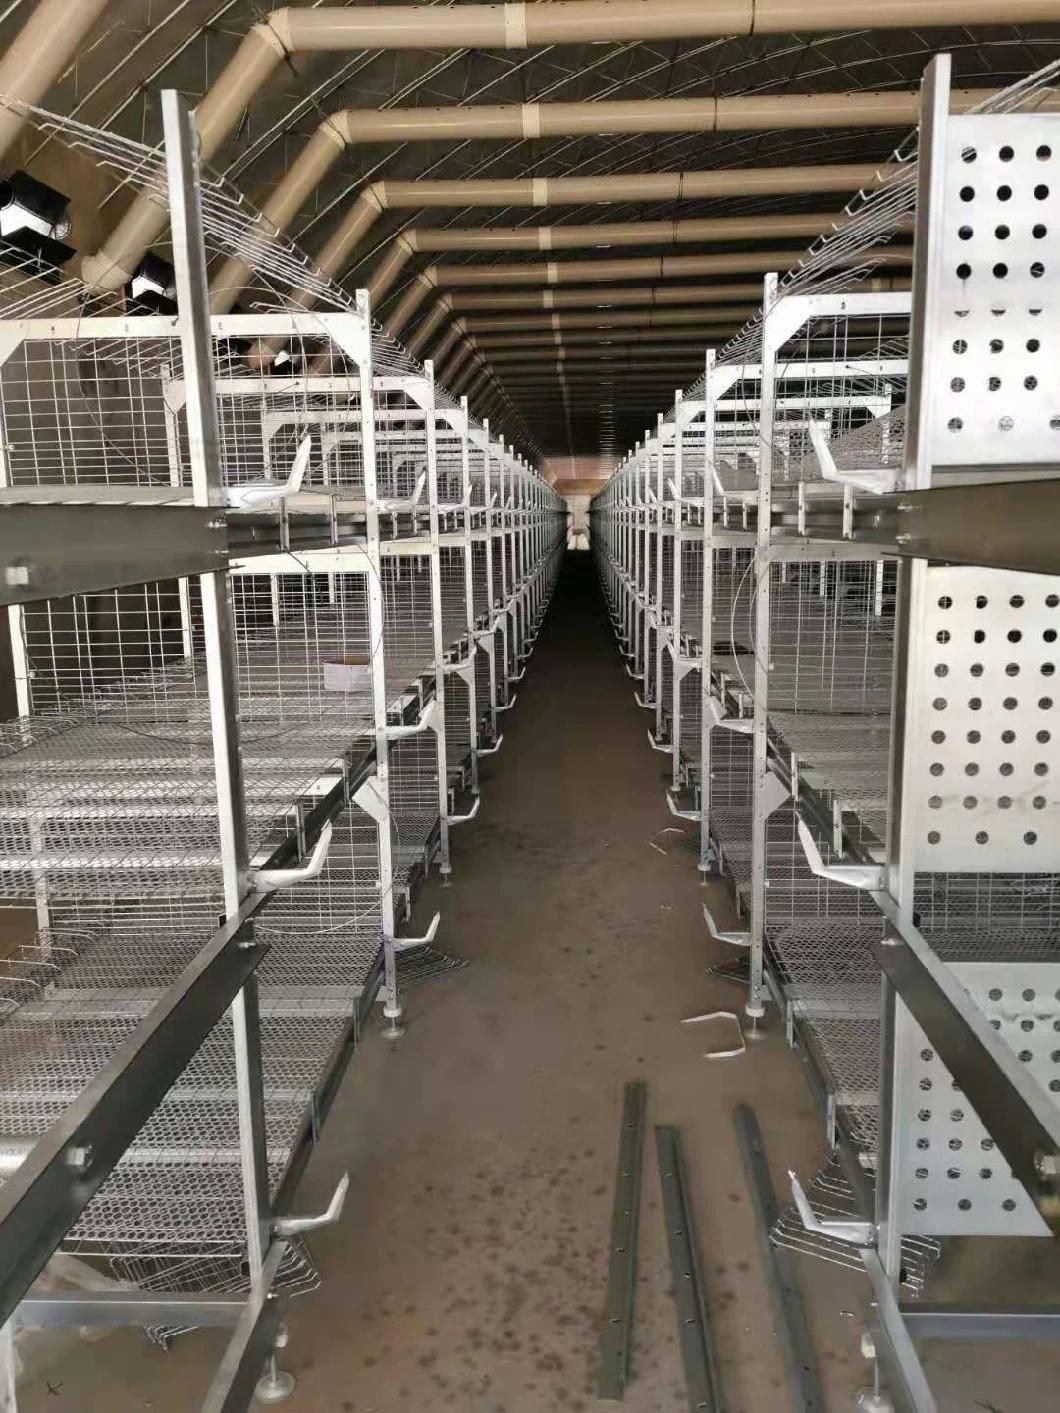 Best Cage for Farm Poultry Farm Lyaer Cage Brioler Cage